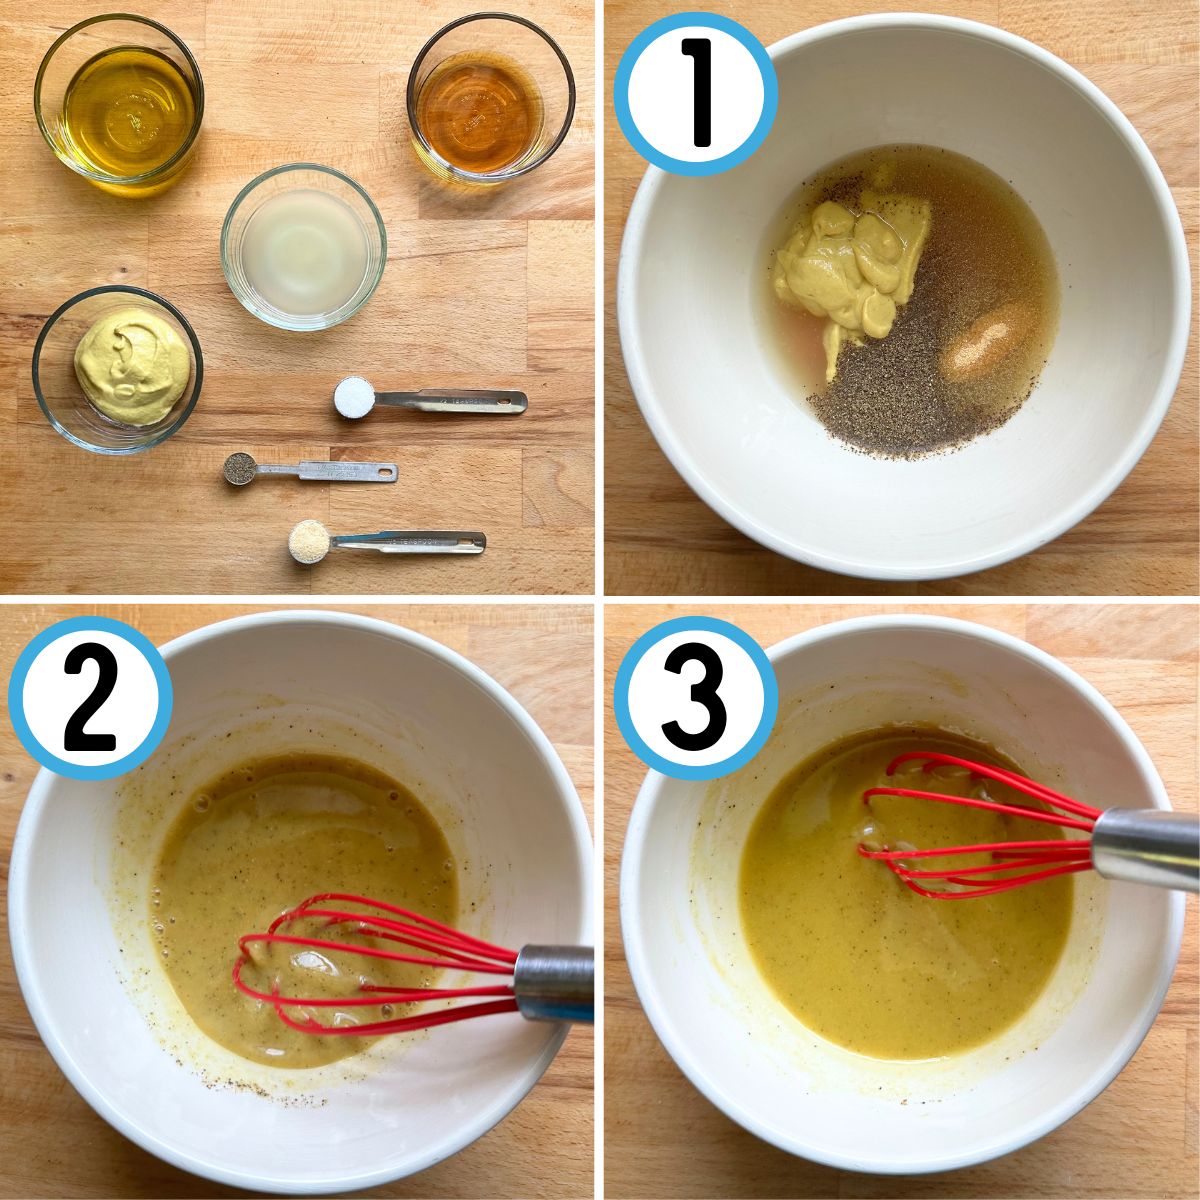 Step by step guide to making maple Dijon vinaigrette. Photo 1: Lay out ingredients. Step 1: Place all ingredients except oil in a bowl. Step 2: Mix. Step 3: Add oil and mix again until dressing is emulsified. 